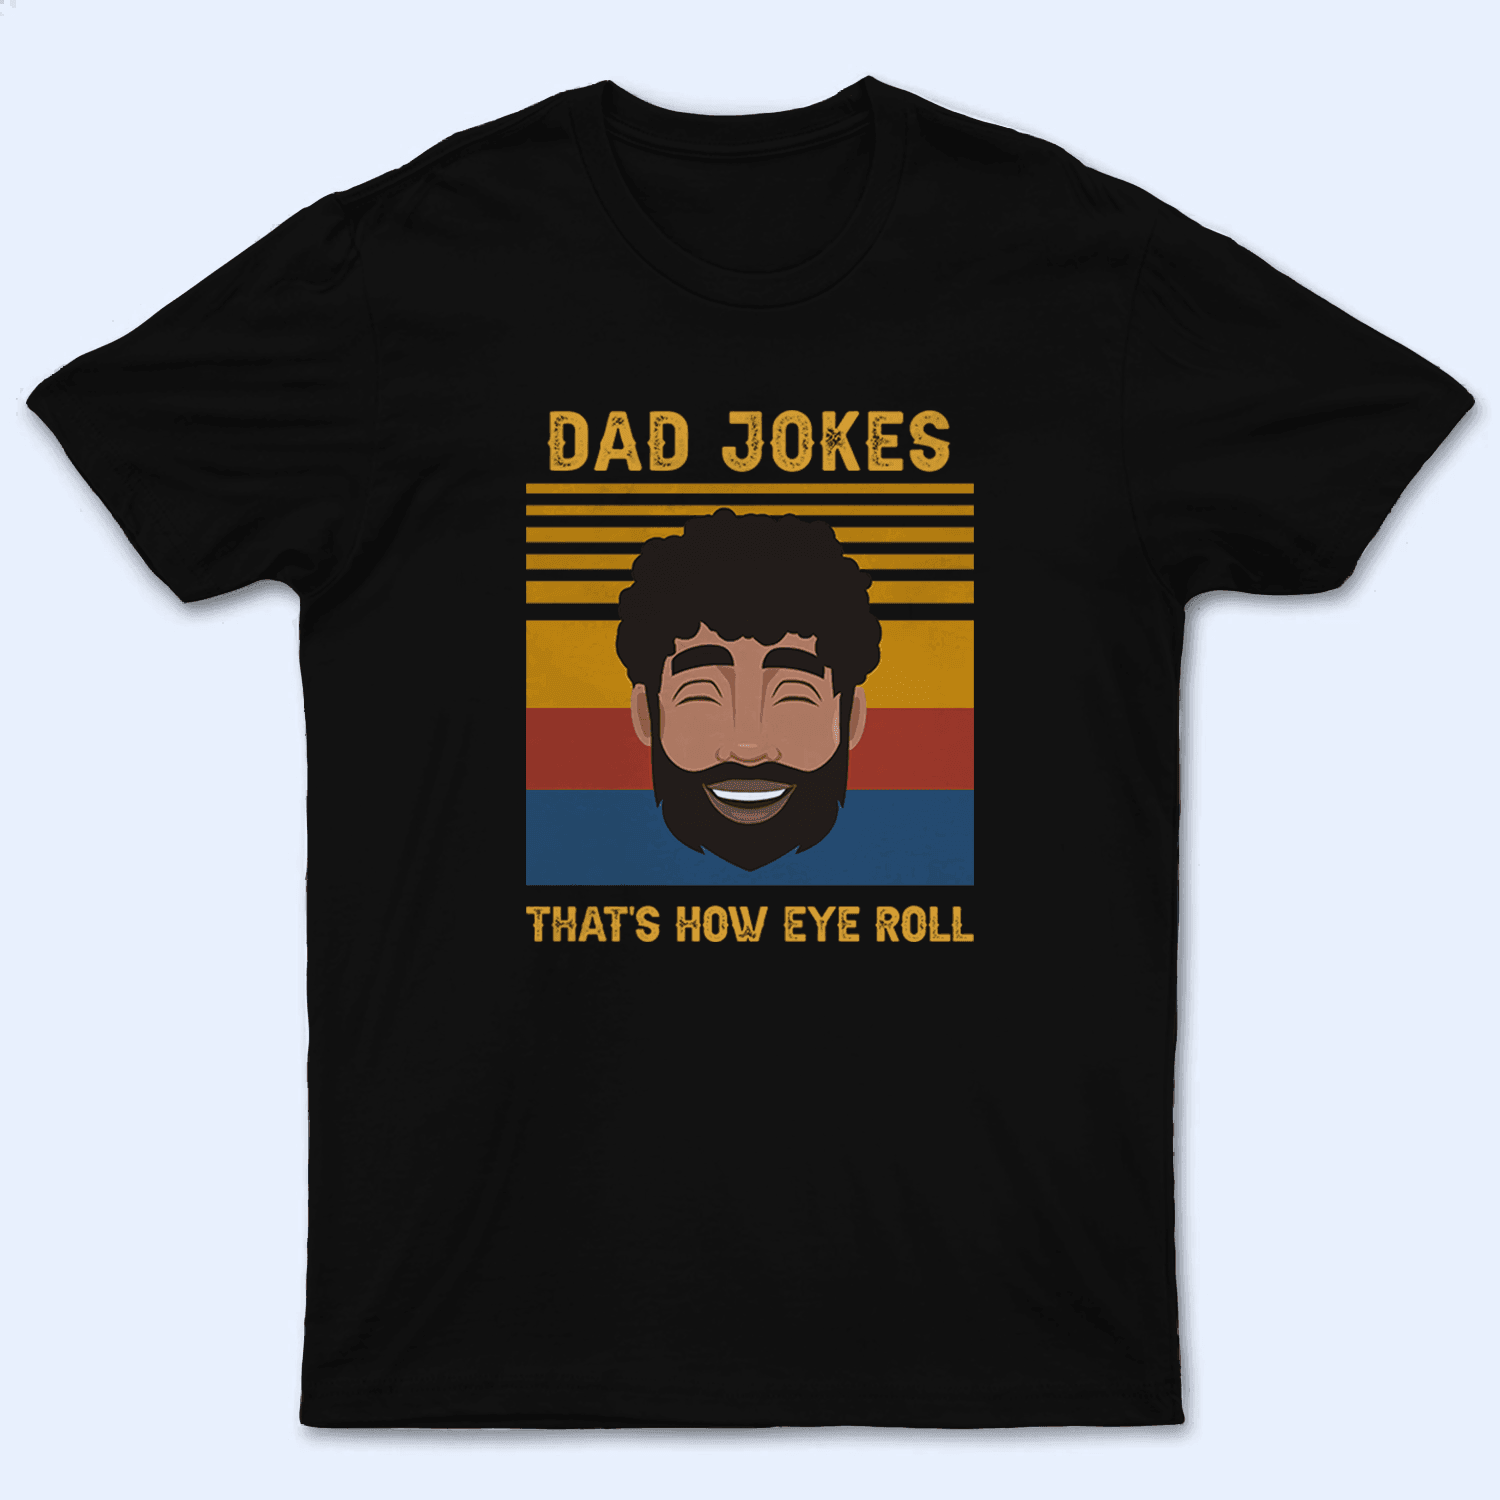 Dad Jokes. That's How Eye Roll - Funny Fathers Day - Personalized Custom T Shirt - Birthday, Loving, Funny Gift for Grandfather/Dad/Father, Husband, Grandparent - Suzitee Store